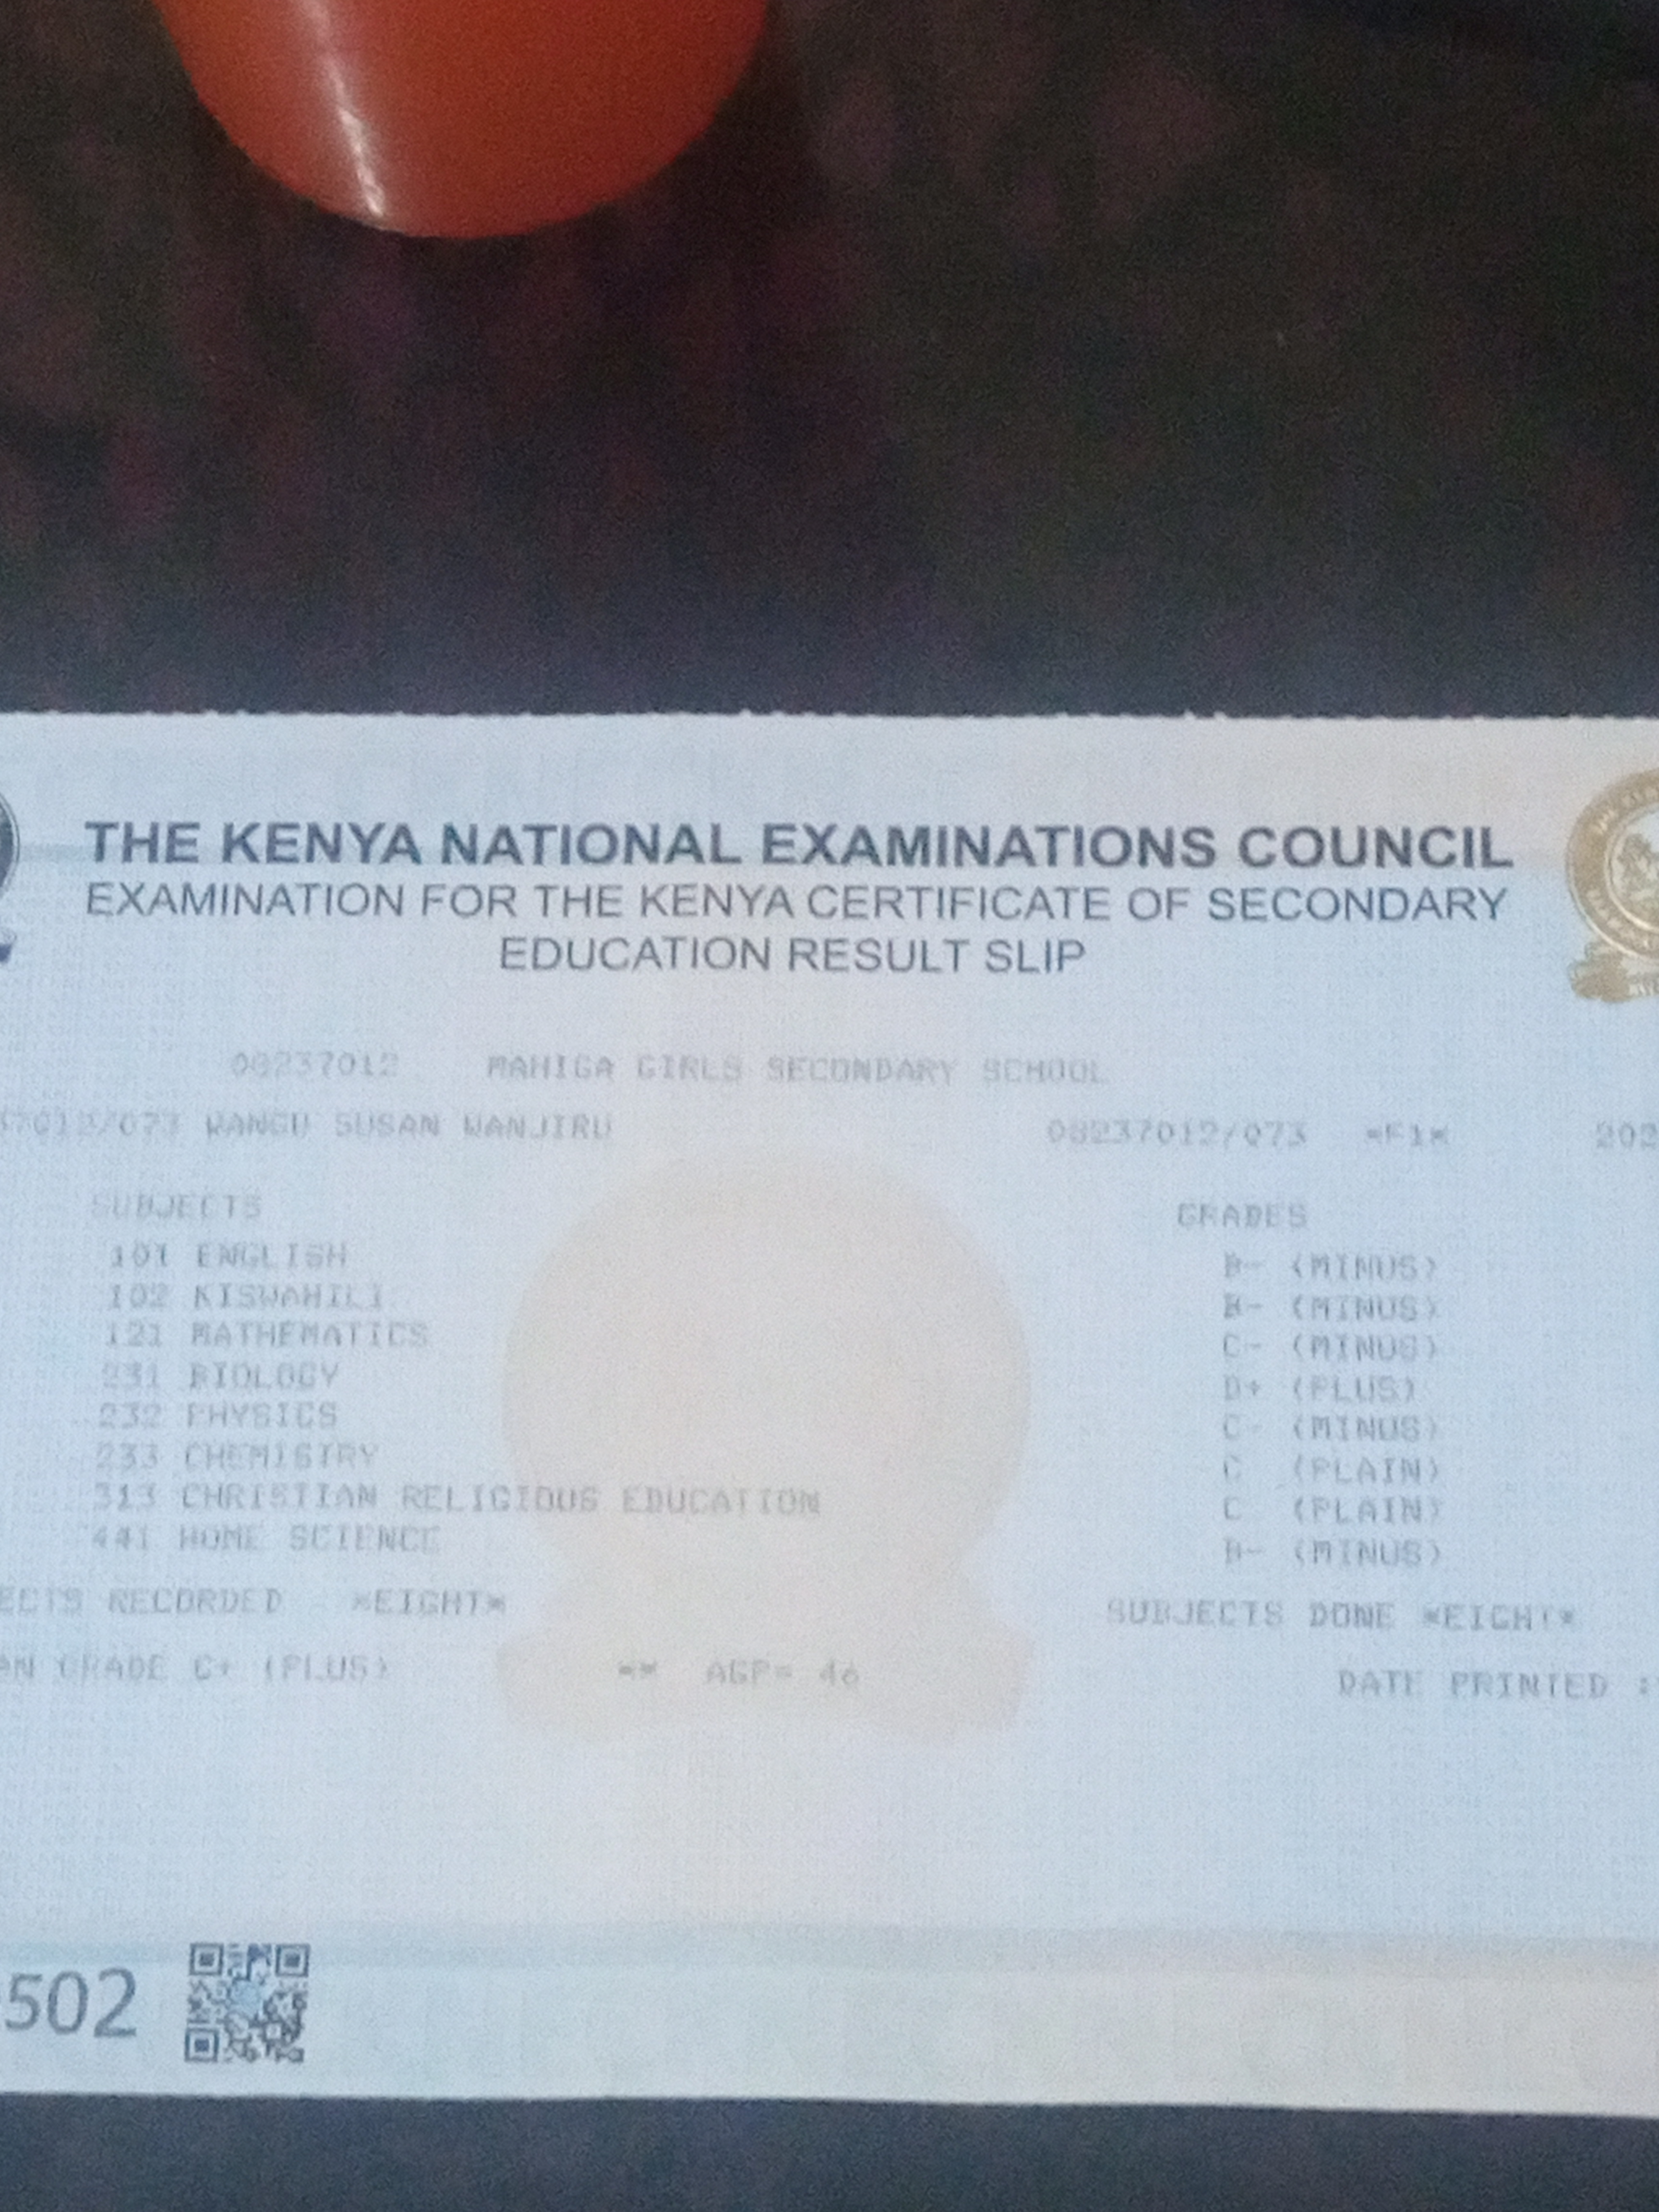 THE KENYA NATIONAL EXAMINATIONS COUNCIL
EXAMINATION FOR THE KENYA CERTIFICATE OF SECONDARY
9 FDUCATION RESULT SLIP

[=] = [w]

Pe 7)
» $n - pW
[Rs | |